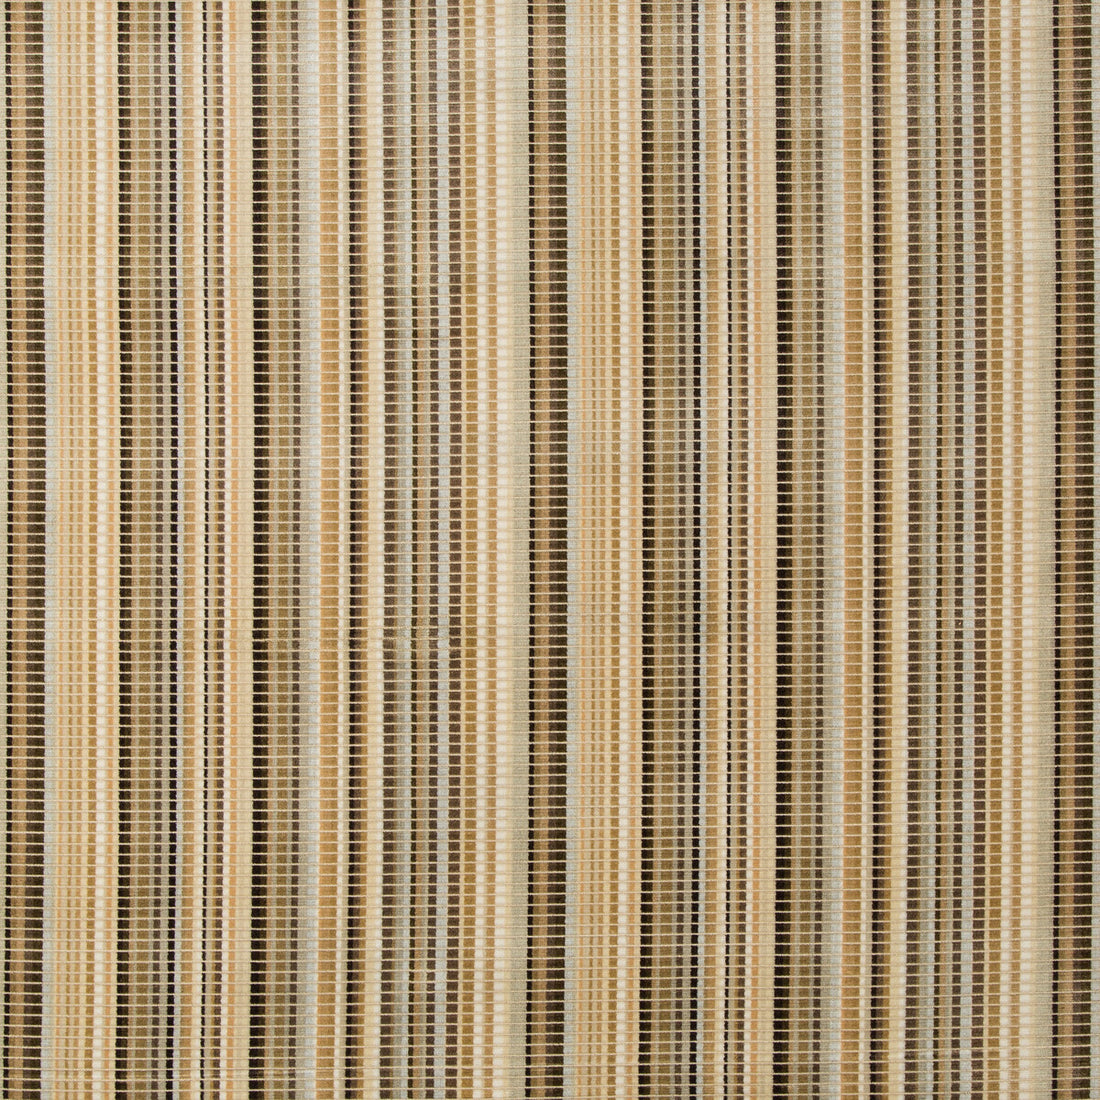 Burton Velvet fabric in sand color - pattern 2019113.116.0 - by Lee Jofa in the Manor House collection